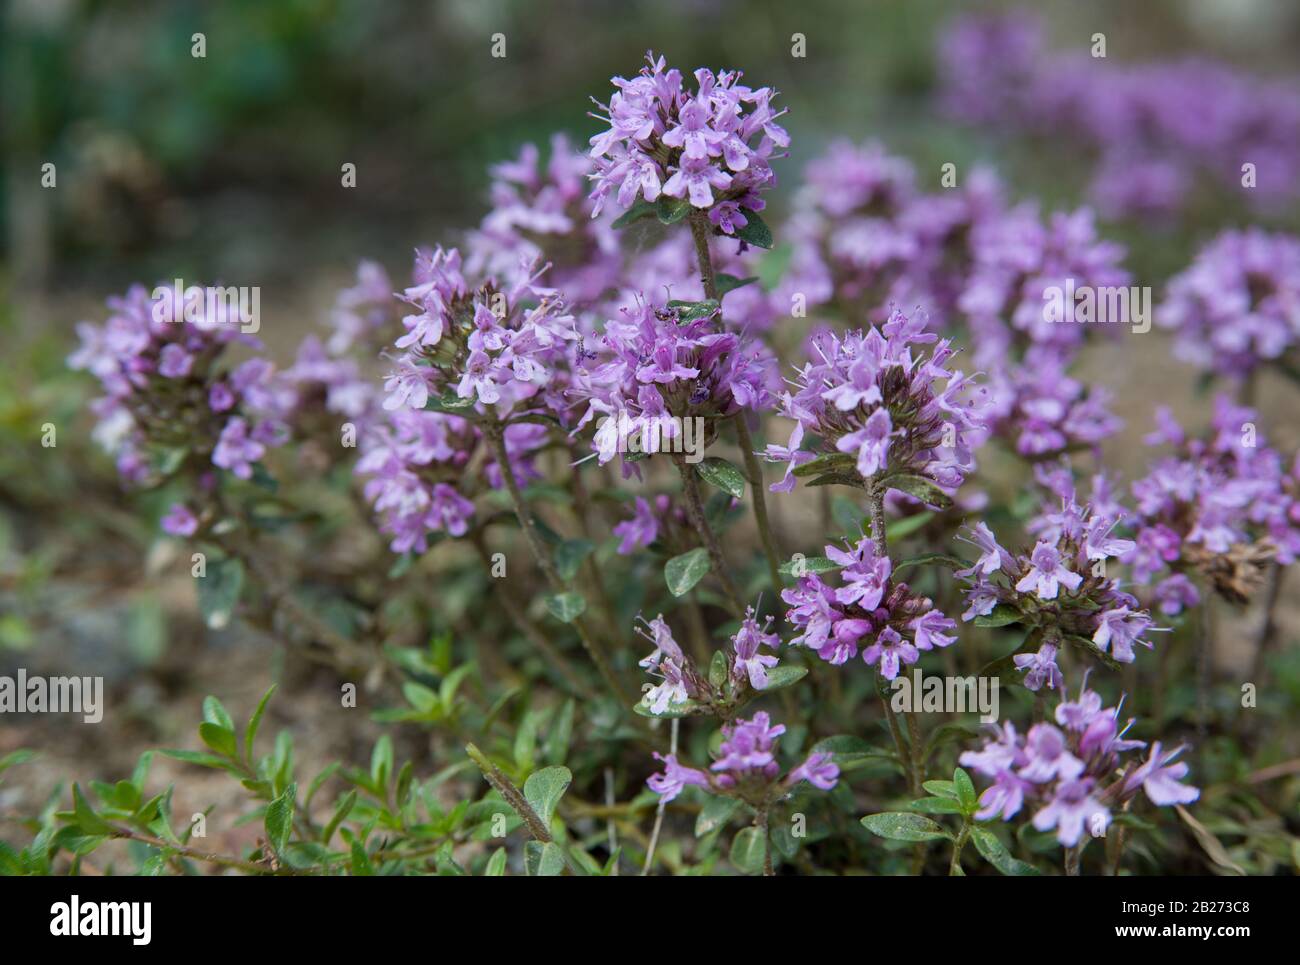 Thyme is culinary and medicinal herbs of the genus Thymus, most commonly Thymus vulgaris. Stock Photo